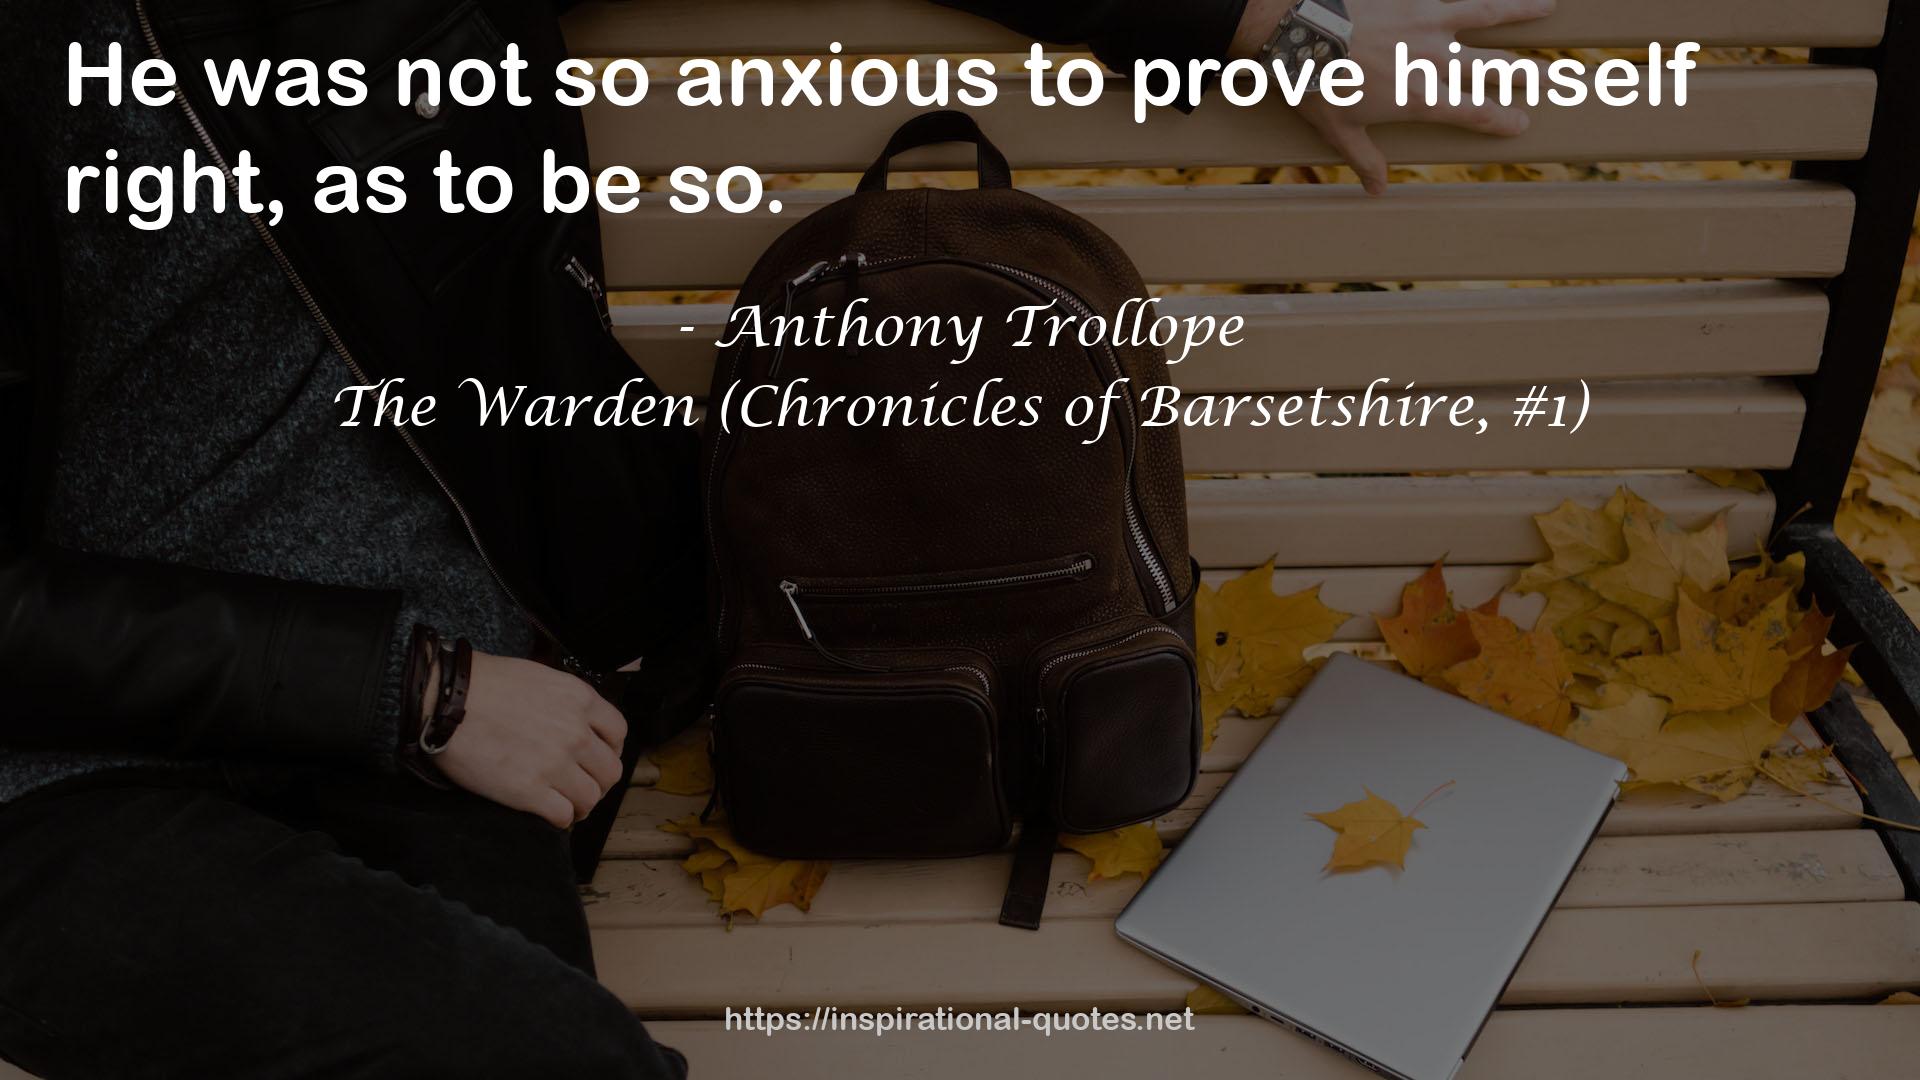 The Warden (Chronicles of Barsetshire, #1) QUOTES